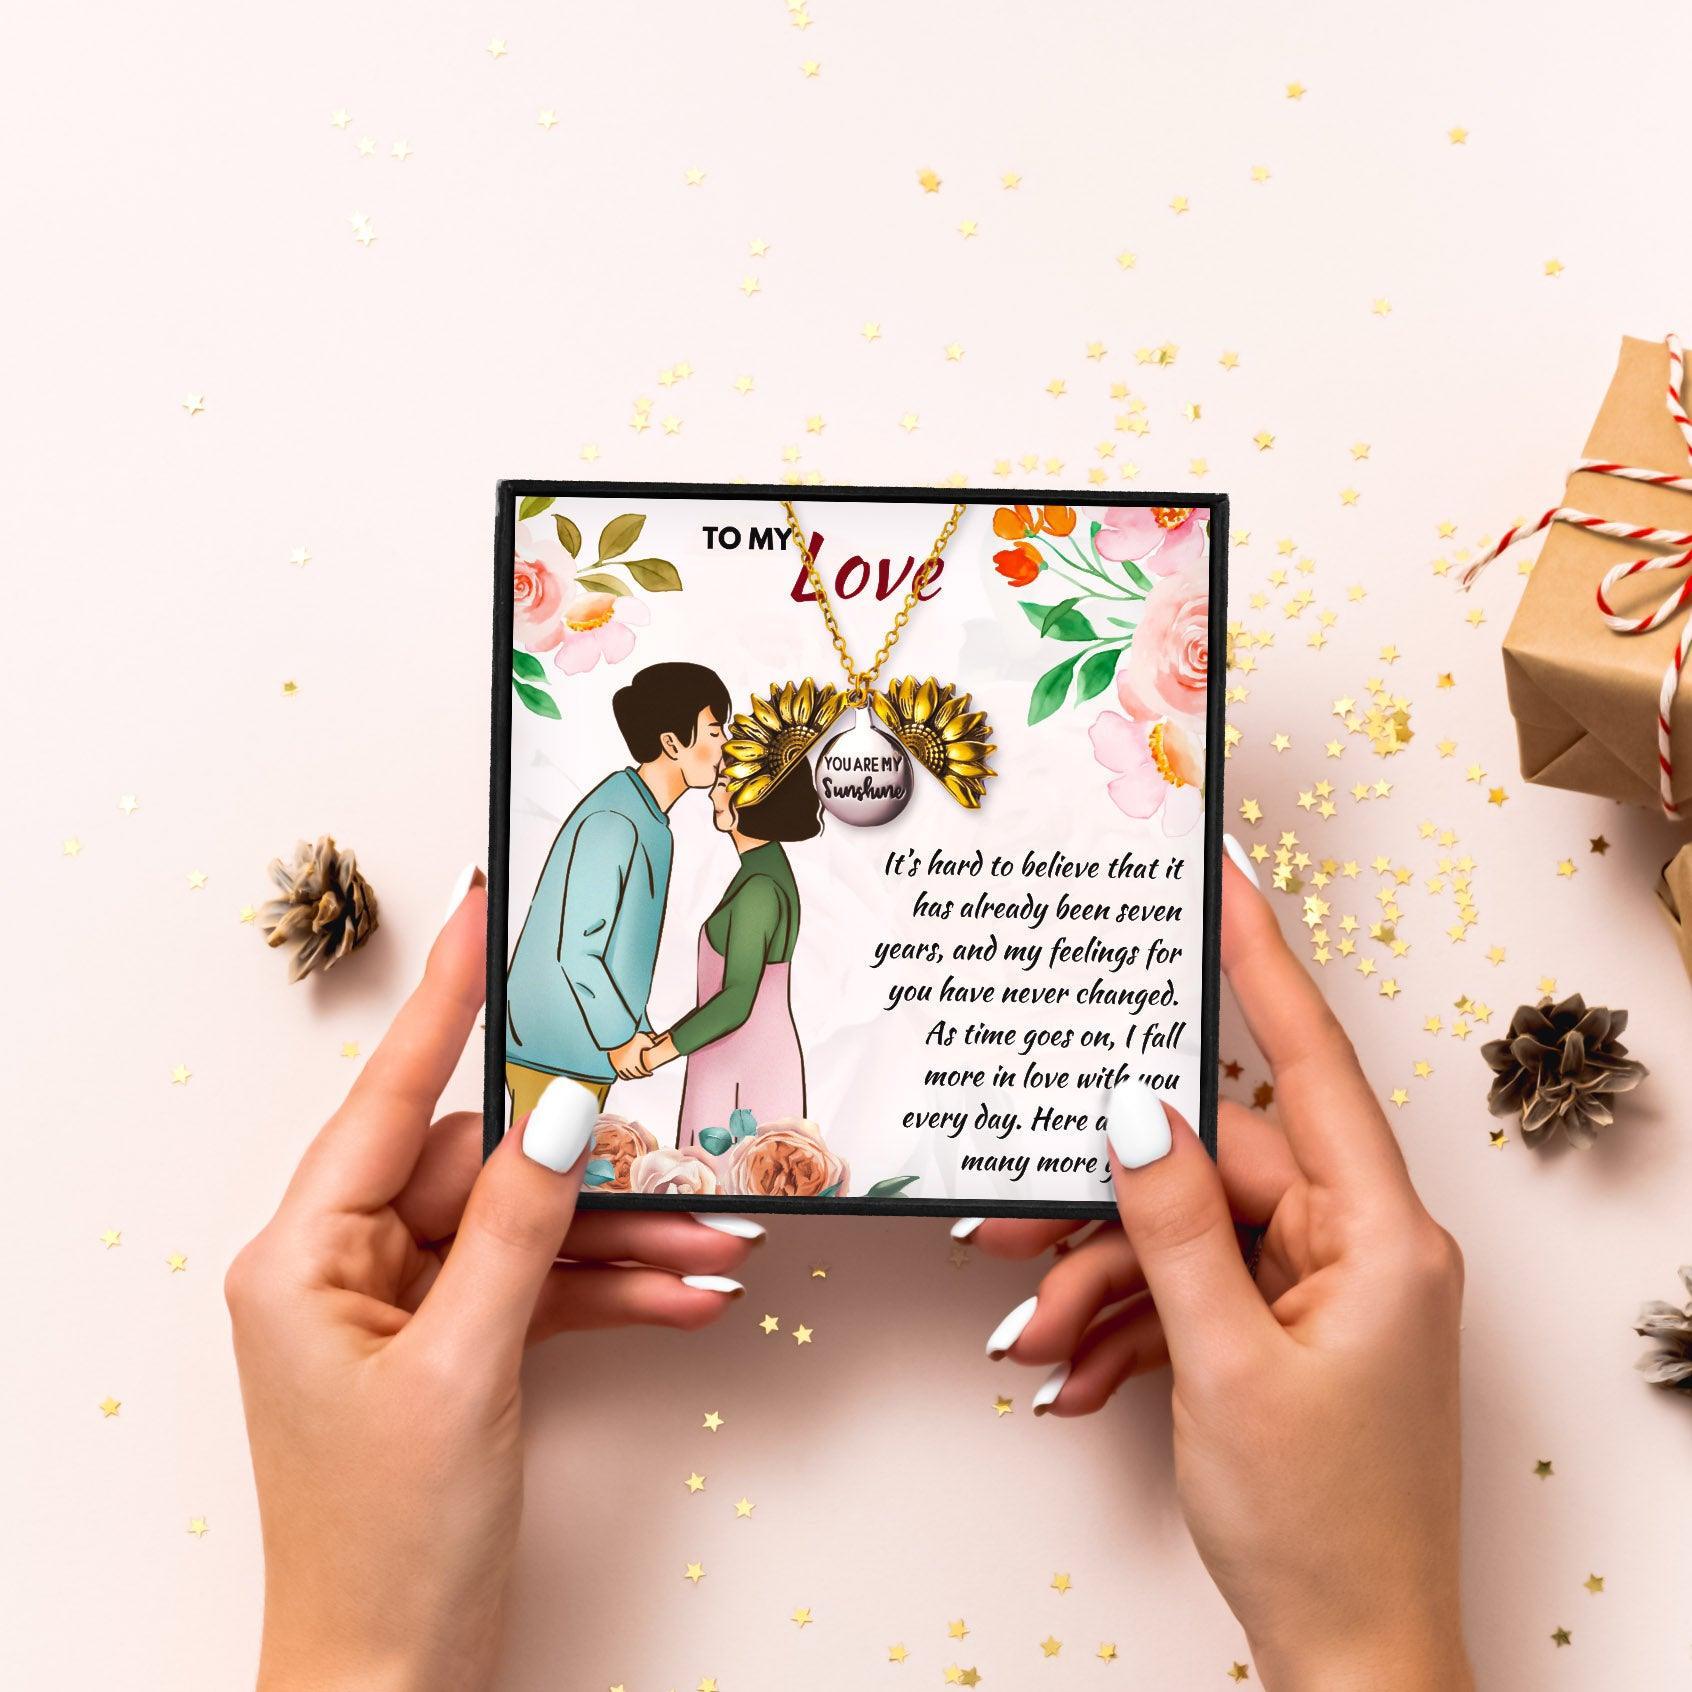 Thoughtful Ideas For Your 7th Wedding Anniversary for Christmas 2023 | Thoughtful Ideas For Your 7th Wedding Anniversary - undefined | 7 year wedding anniversary, 7 year wedding anniversary gifts, 7th year anniversary gift traditional, Sunflower Necklaces | From Hunny Life | hunnylife.com